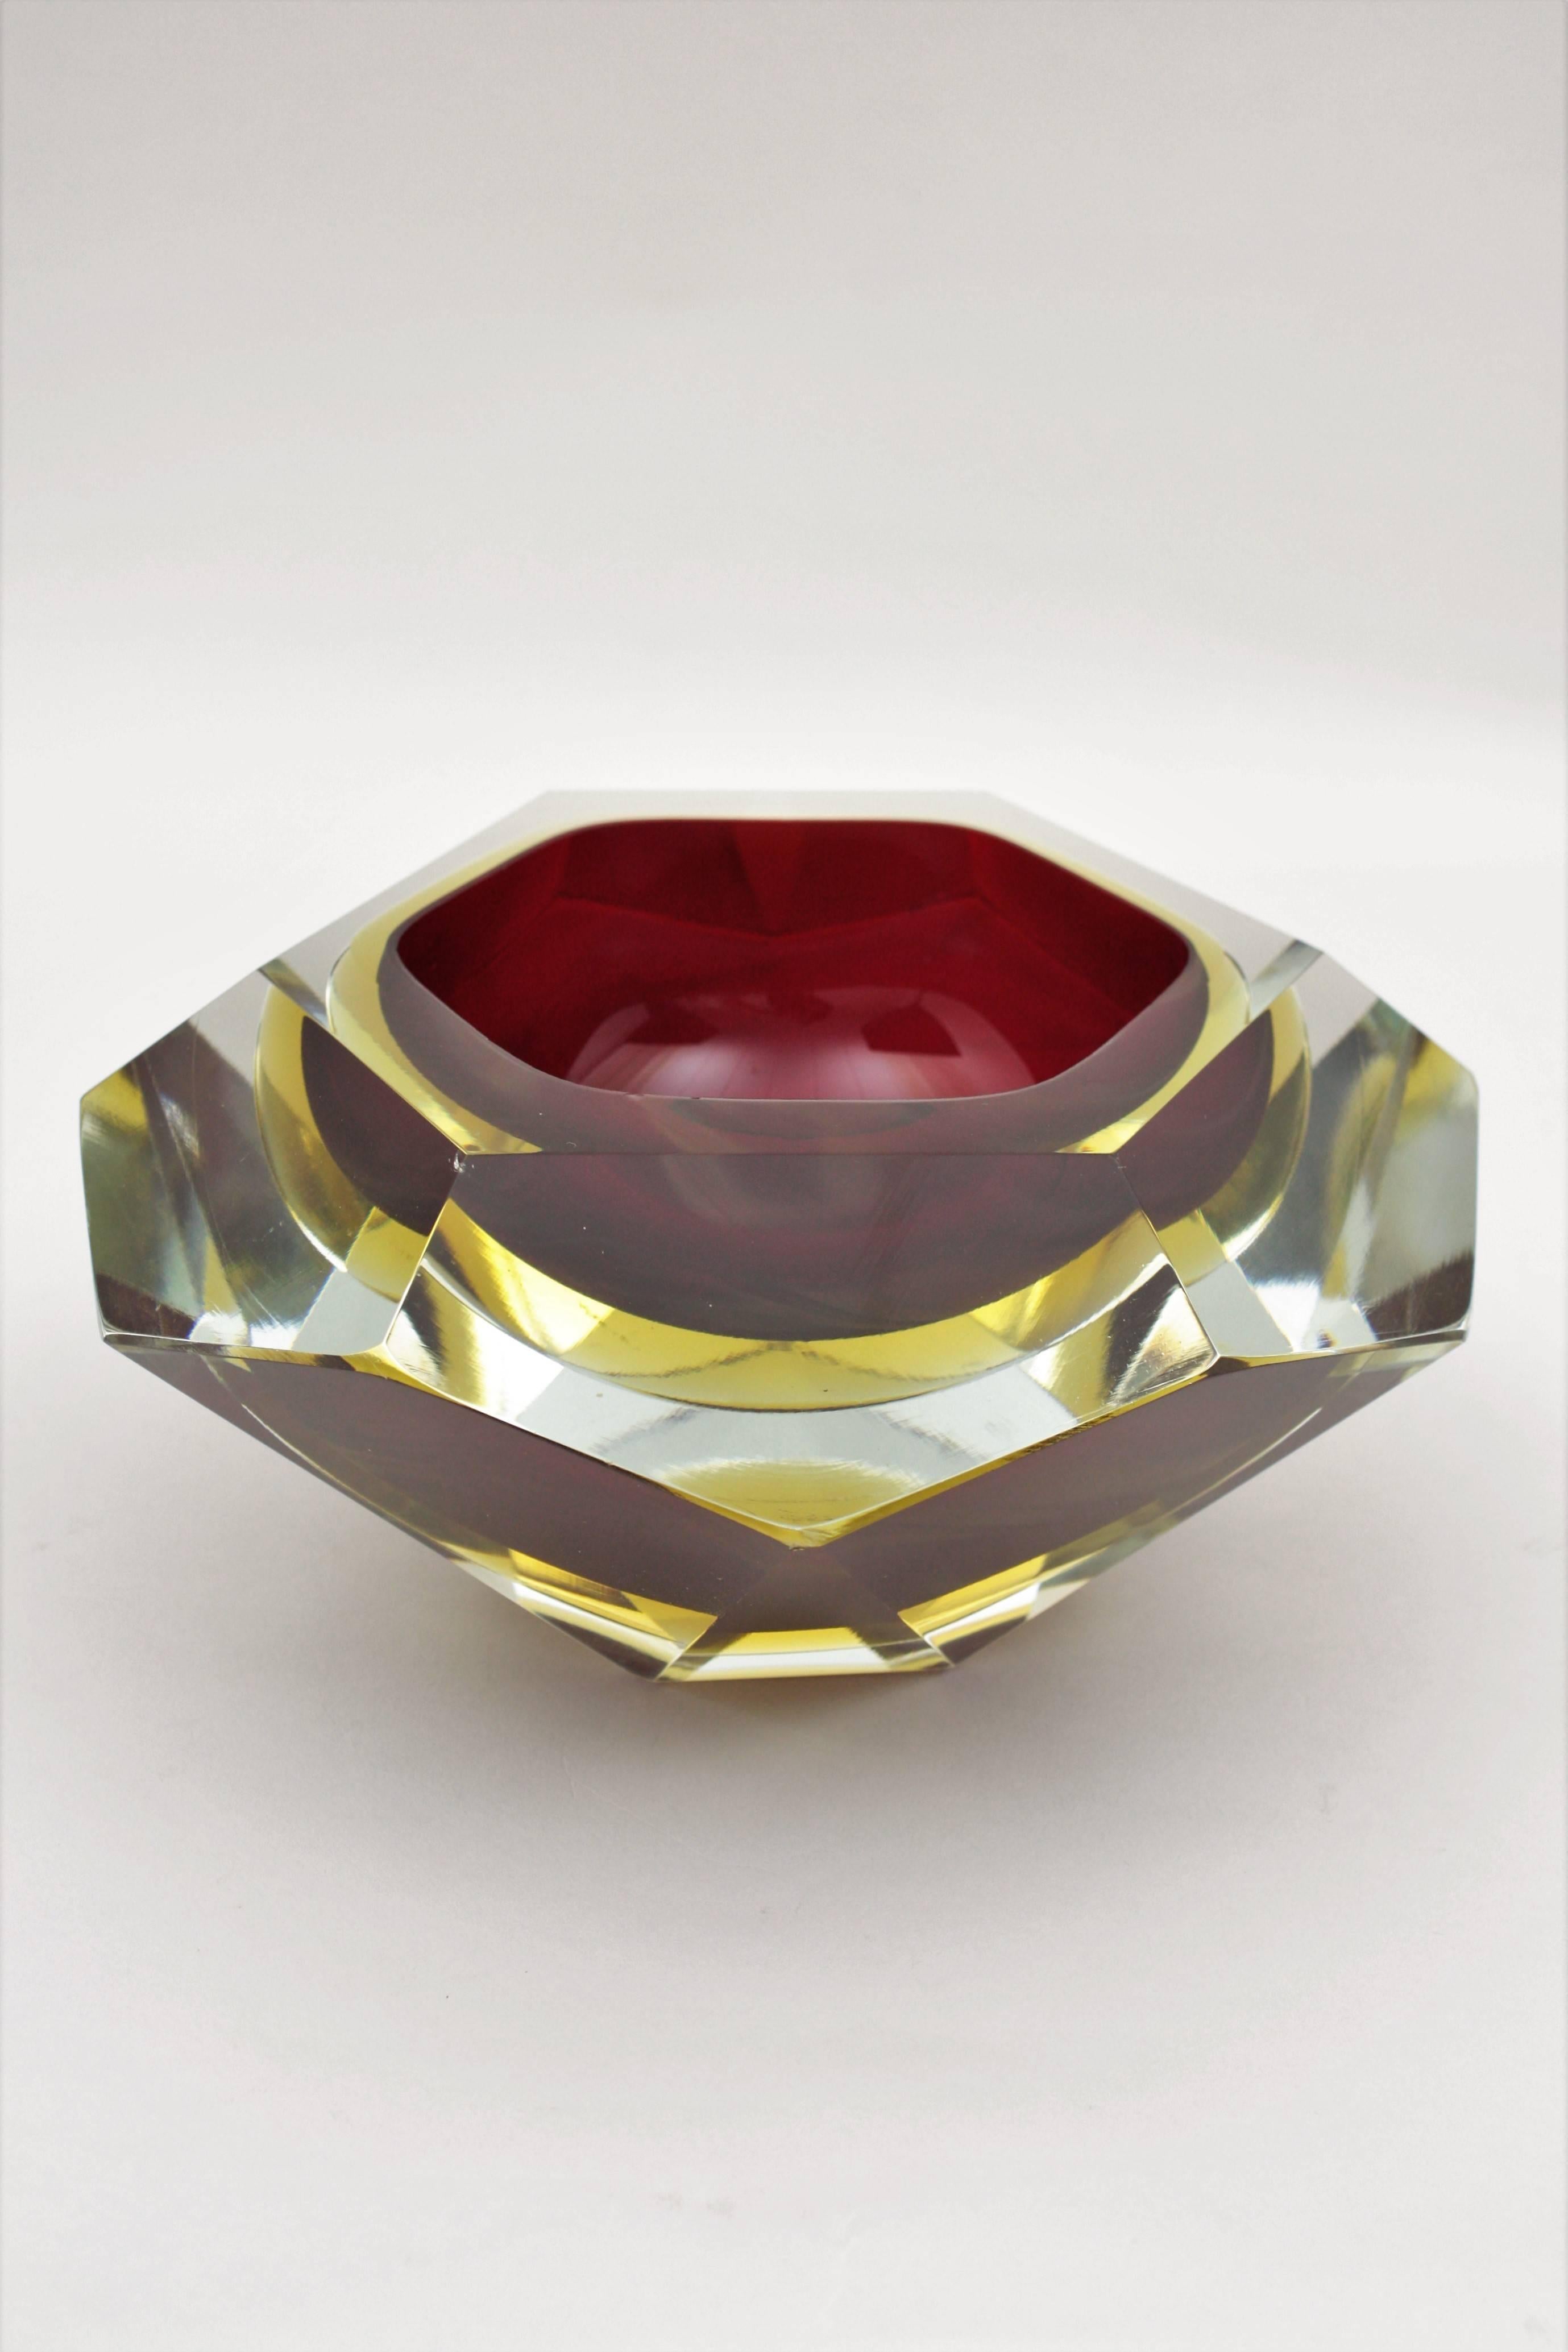 A monumental and spectacular giant sized Sommerso faceted Murano glass bowl or centerpiece in ruby red and yellow double cased glass into clear class, faceted diamond shape and an unusual extra large size. The bigger size in this design we have ever